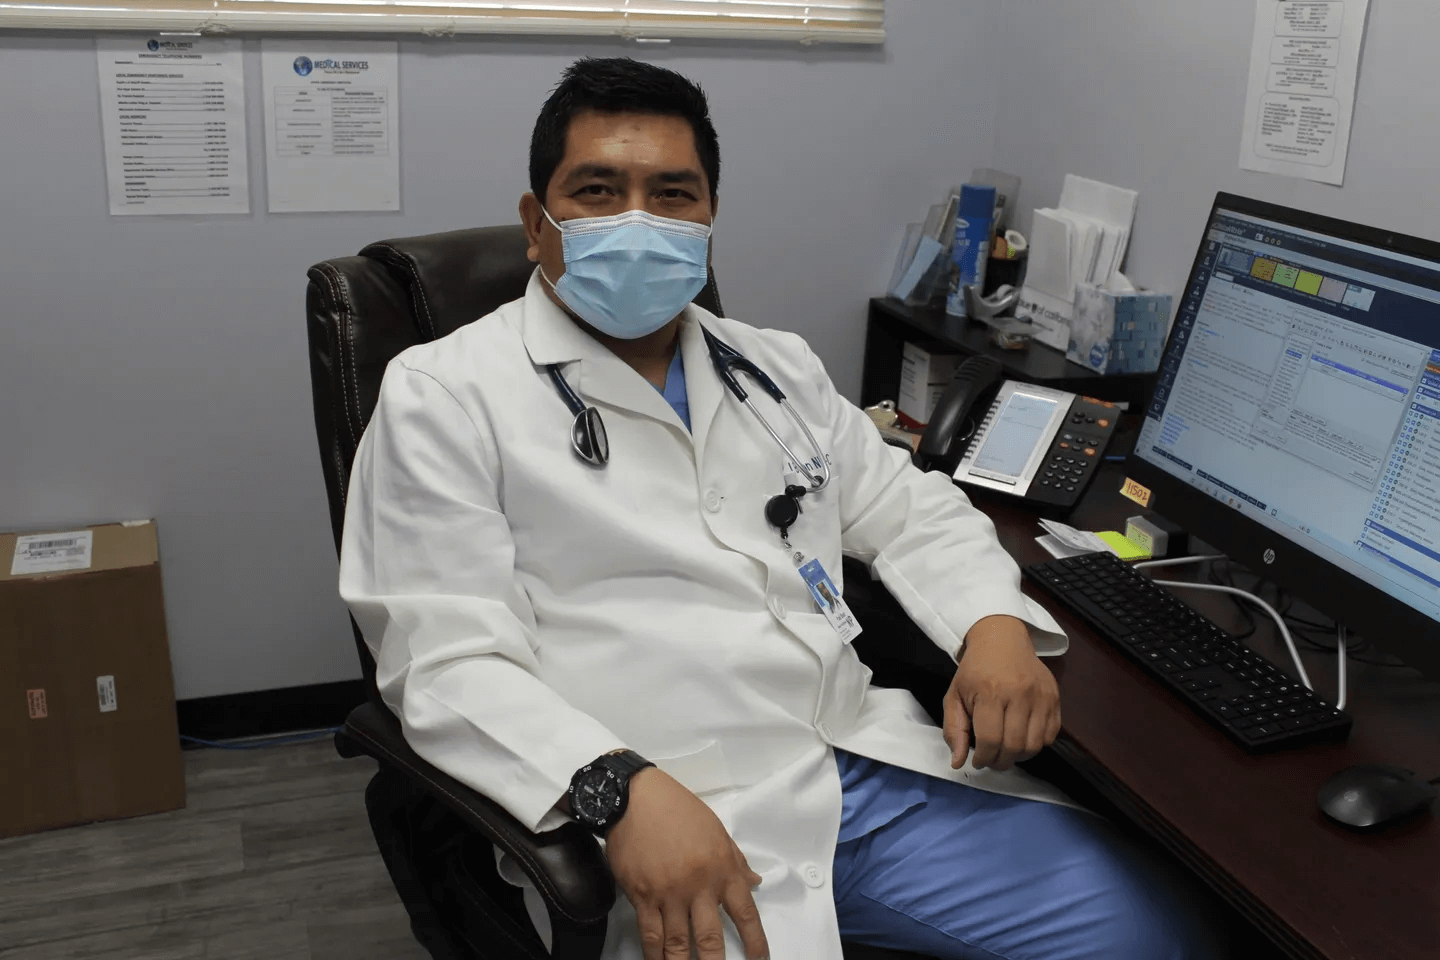 A doctor sitting in his office wearing a mask.